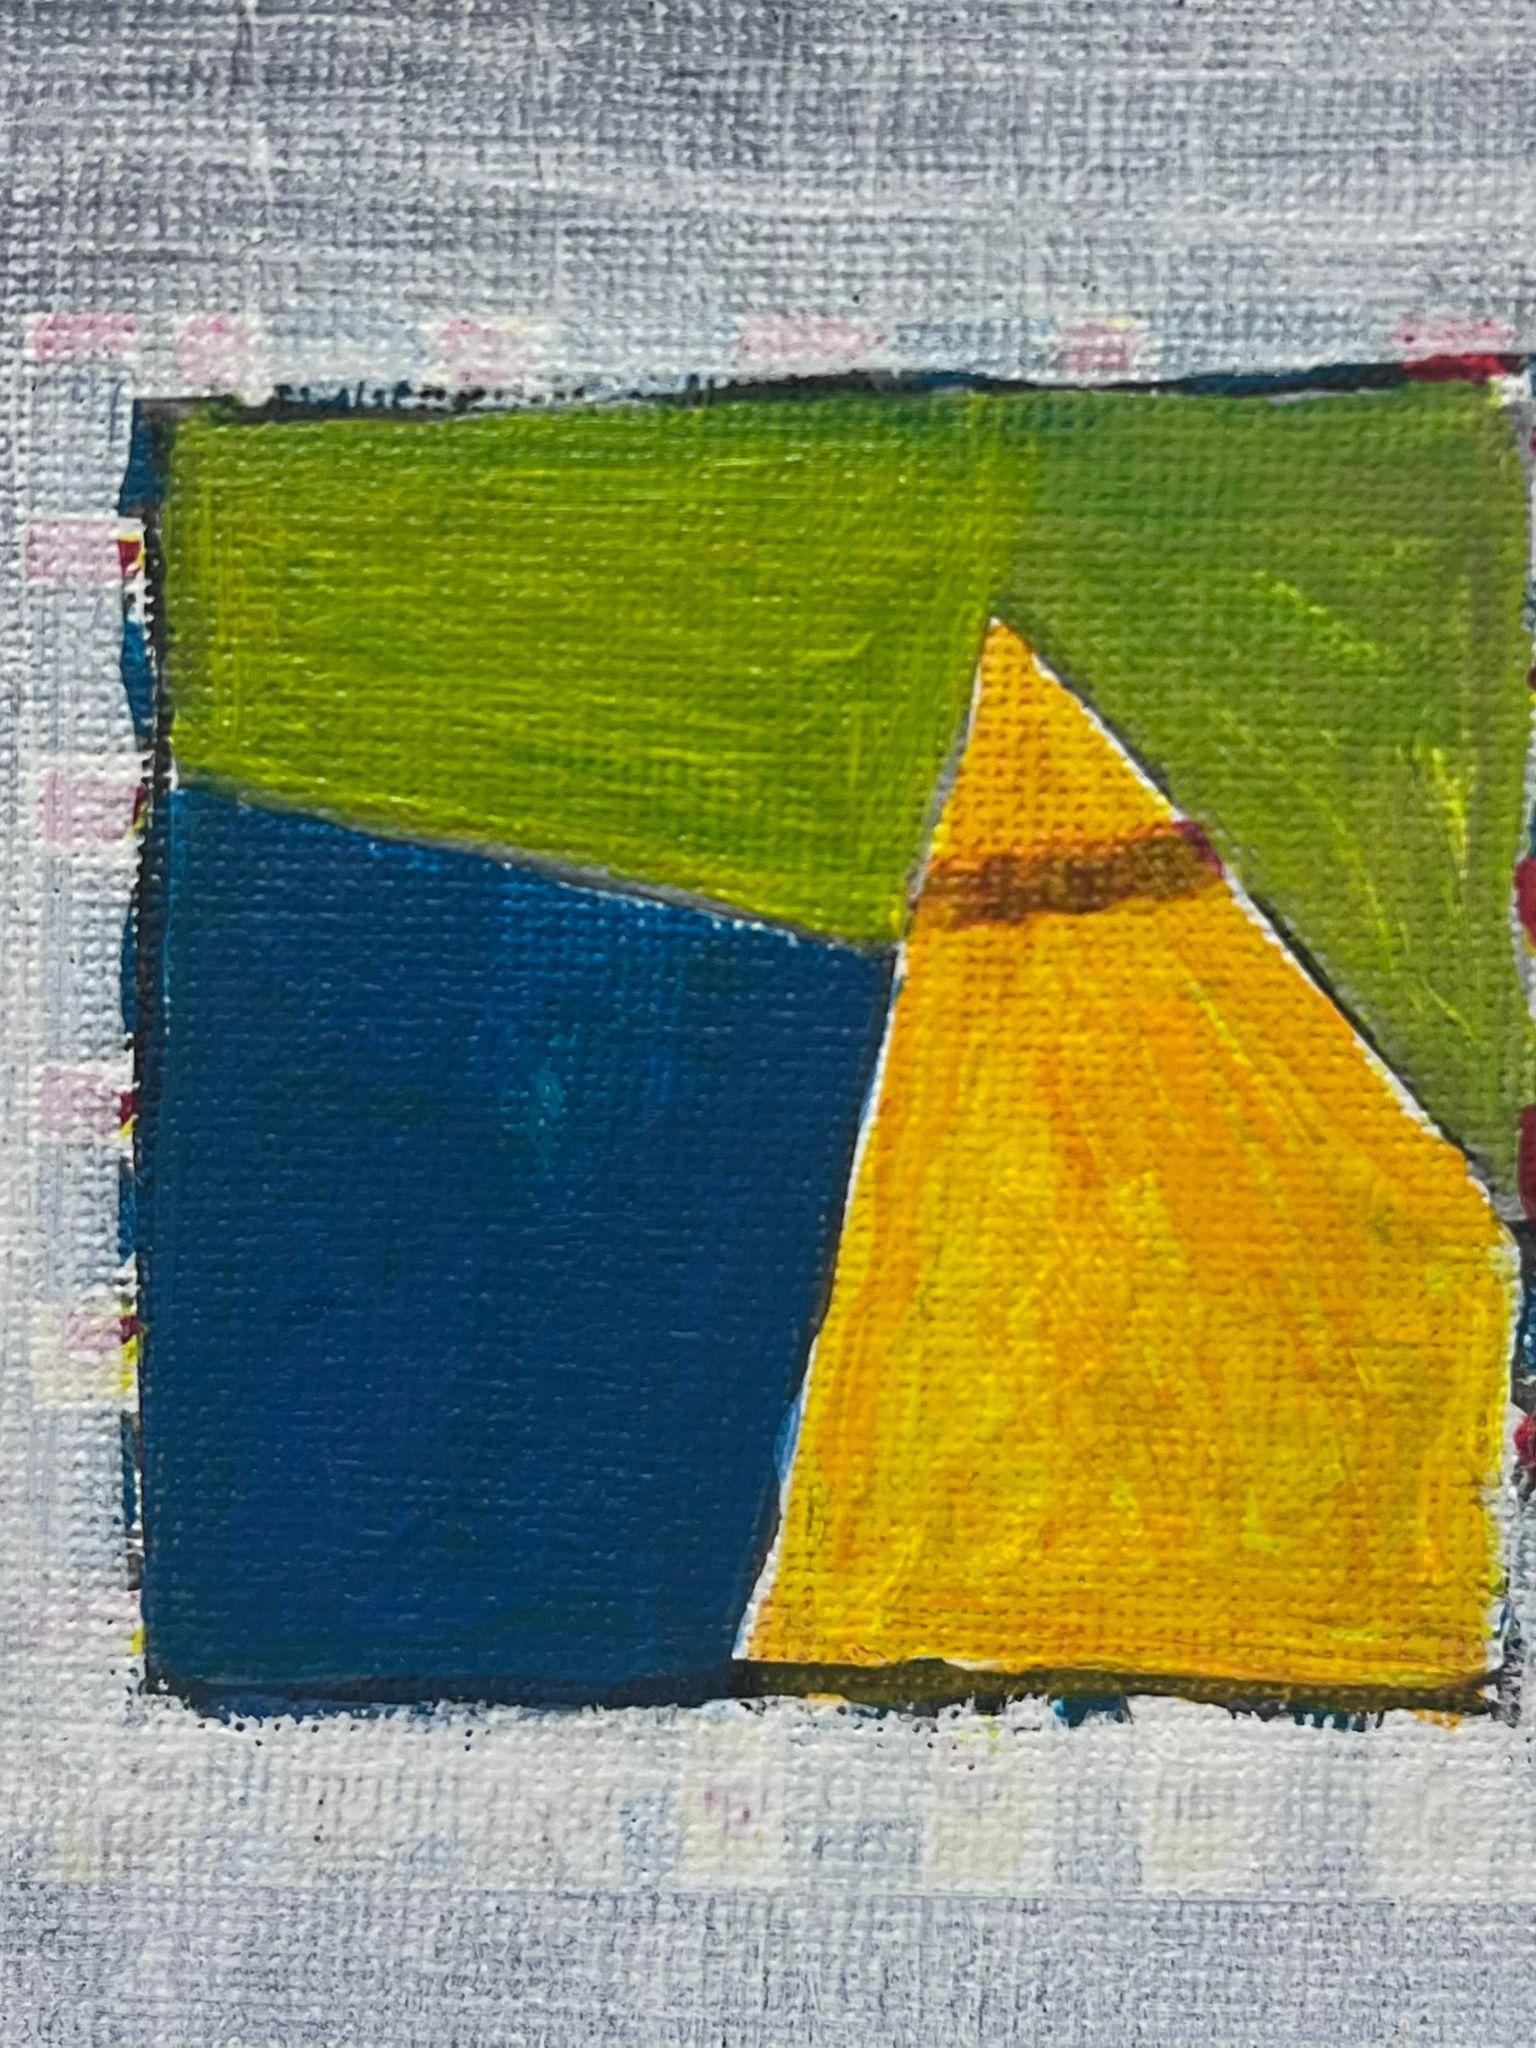 Abstract Expressionist Composition
by Jacques COULAIS (1955-2011)
oil painting on board
unframed: 5 x 5 inches
condition: excellent
provenance: all the paintings we have for sale by this artist have come from the artists studio and are all featured